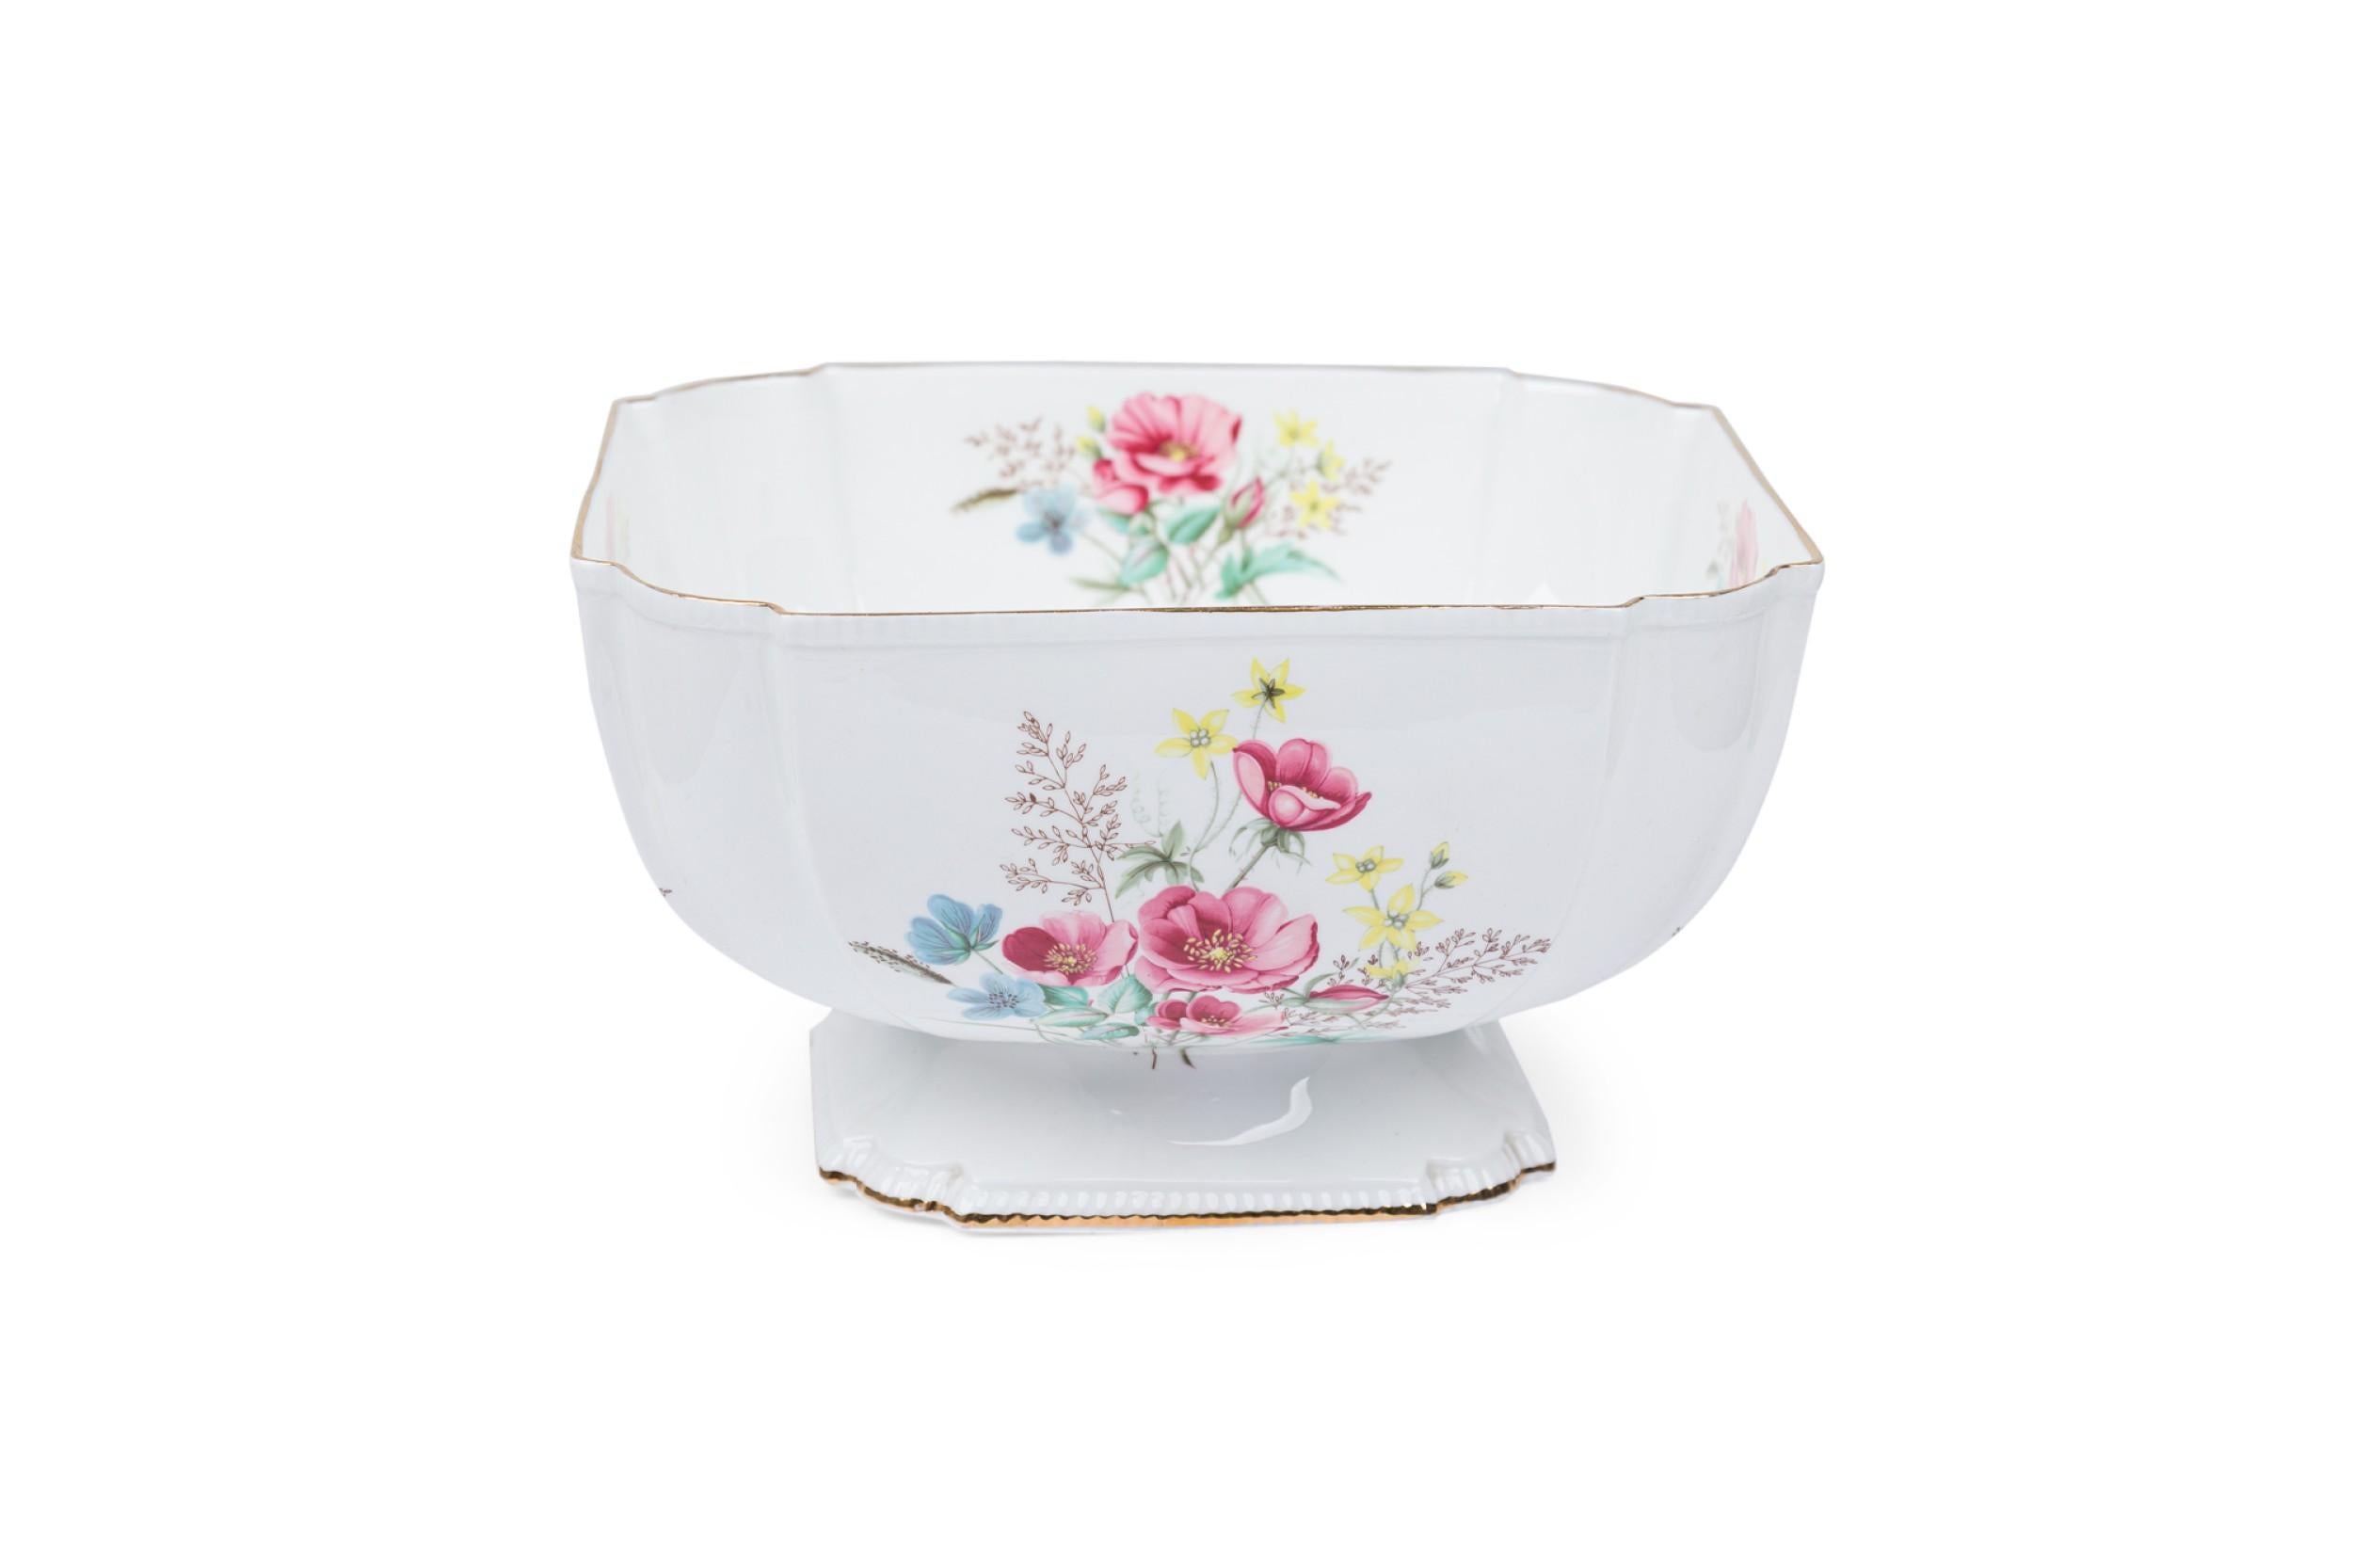 Painted Aynsley Mid-Century English Bone China Centerpiece Bowl with Floral Decoration For Sale